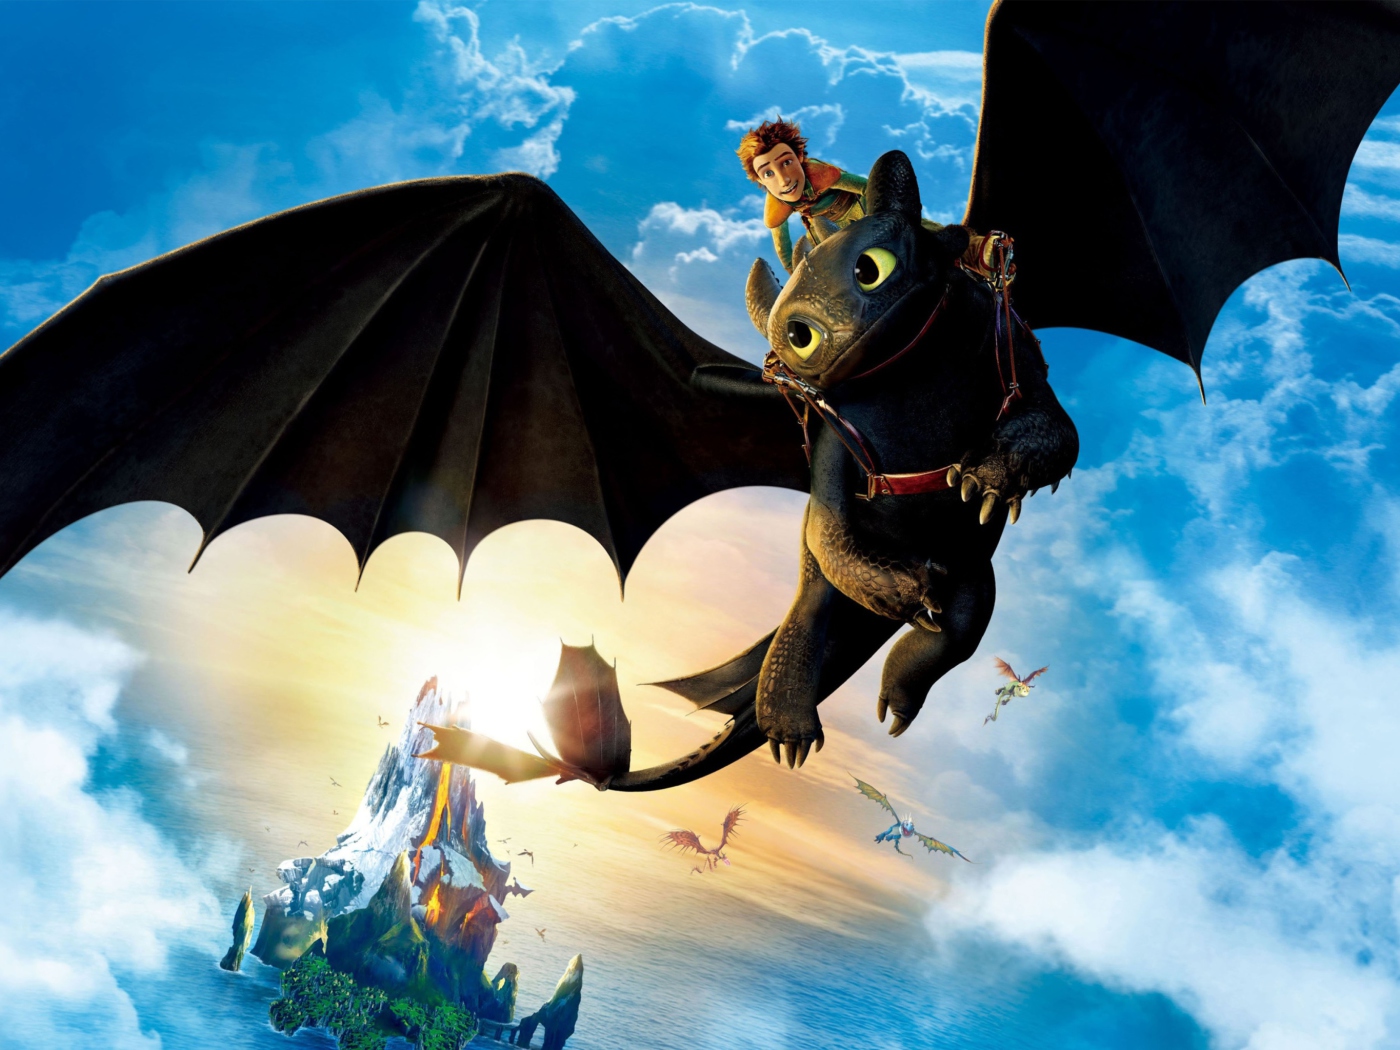 Hiccup Riding Toothless wallpaper 1400x1050